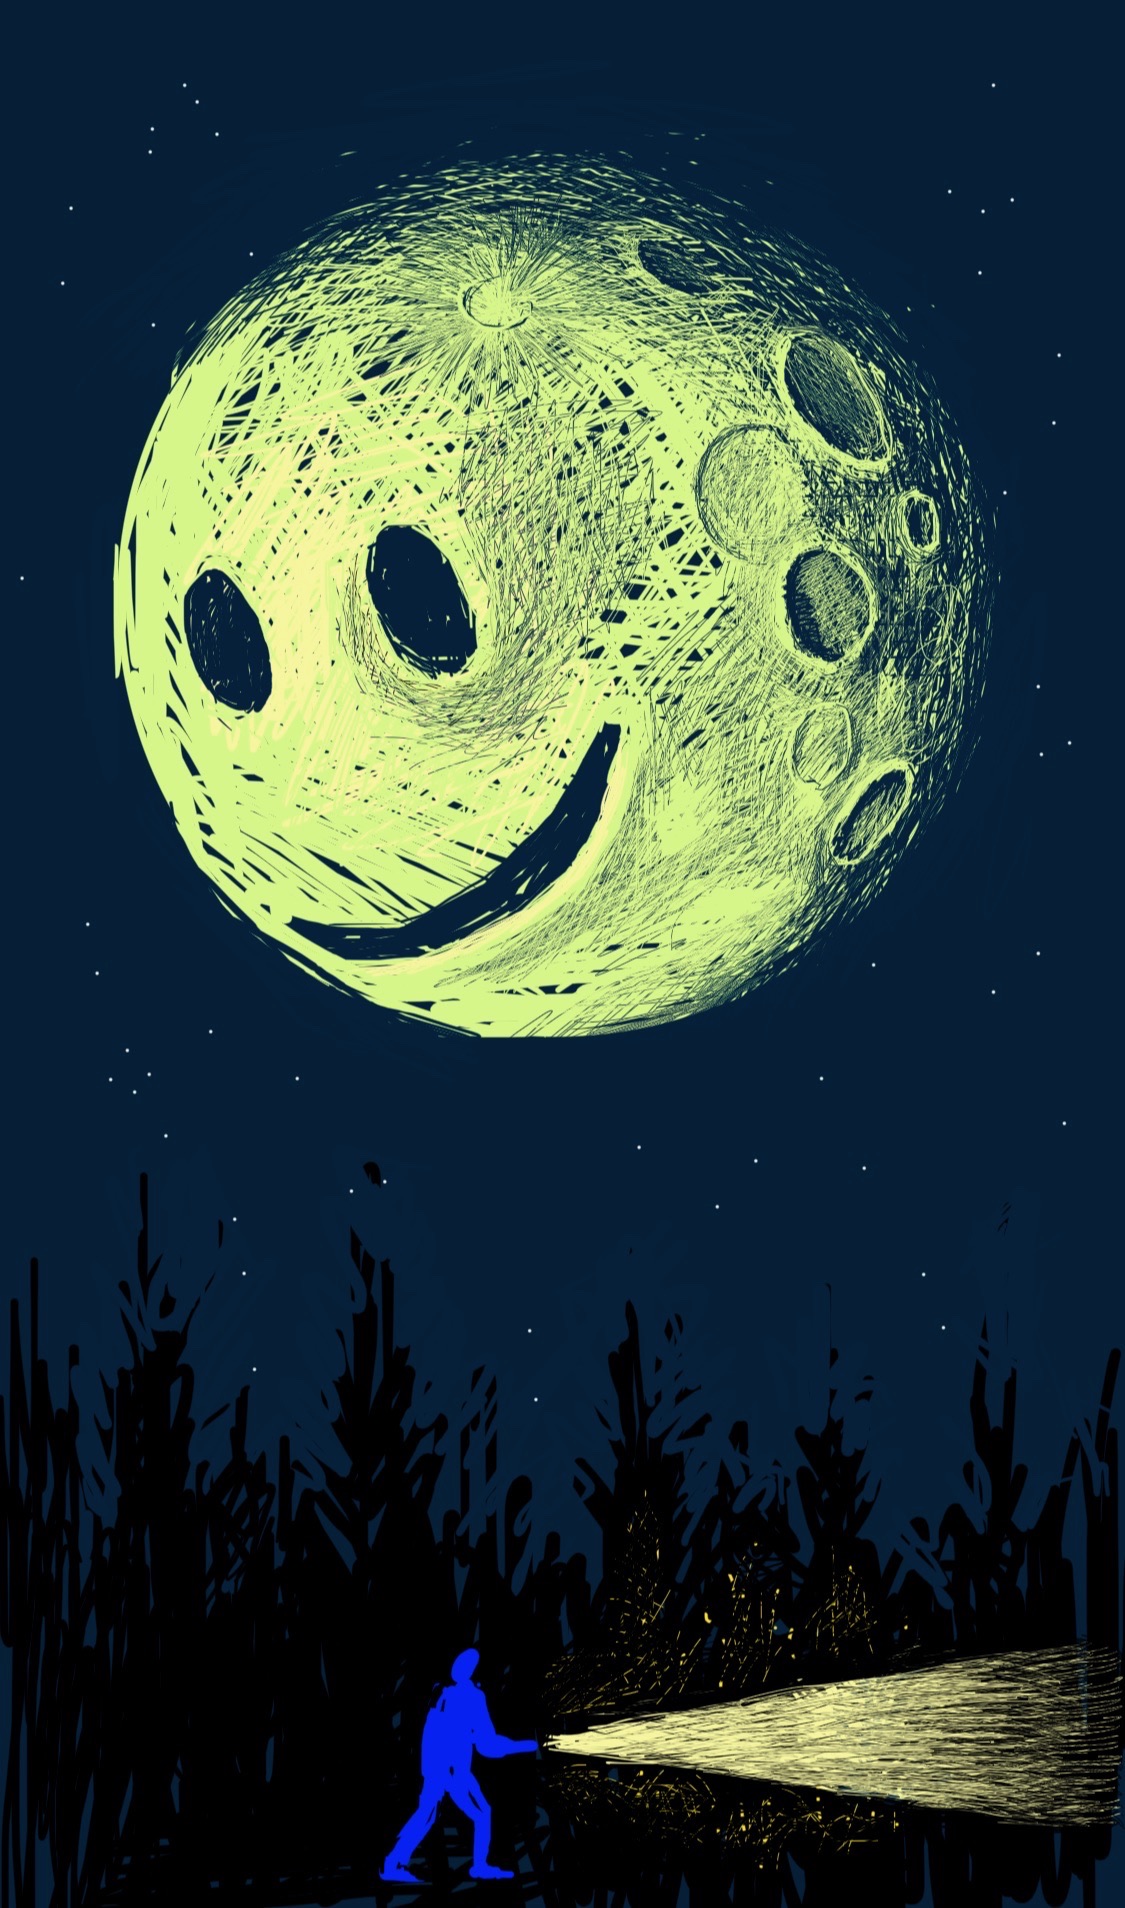 A giant moon with a smiley face hangs over a forest at night. A small figure with a flashlight casts a beam.